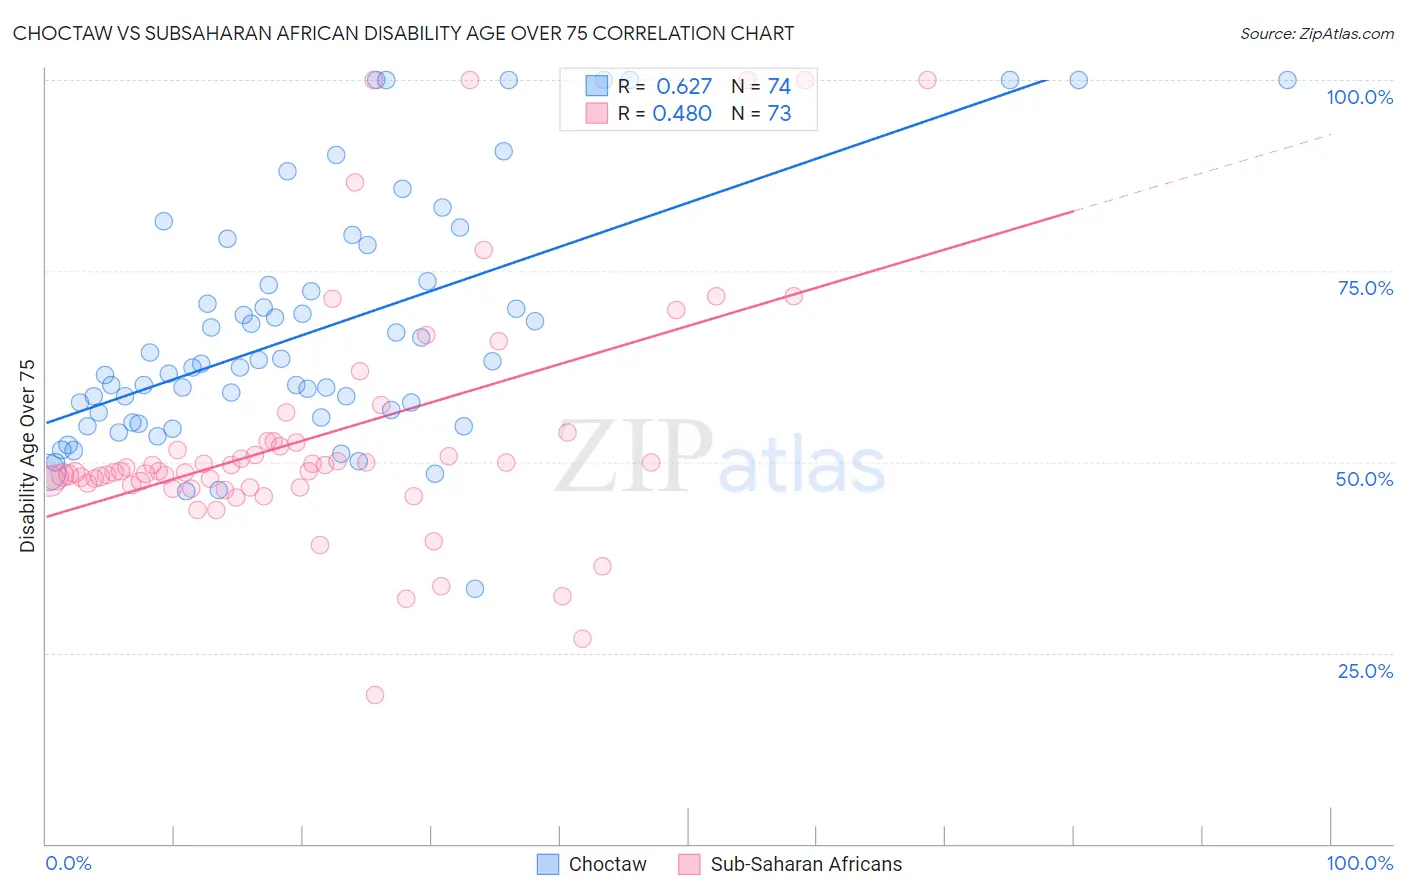 Choctaw vs Subsaharan African Disability Age Over 75